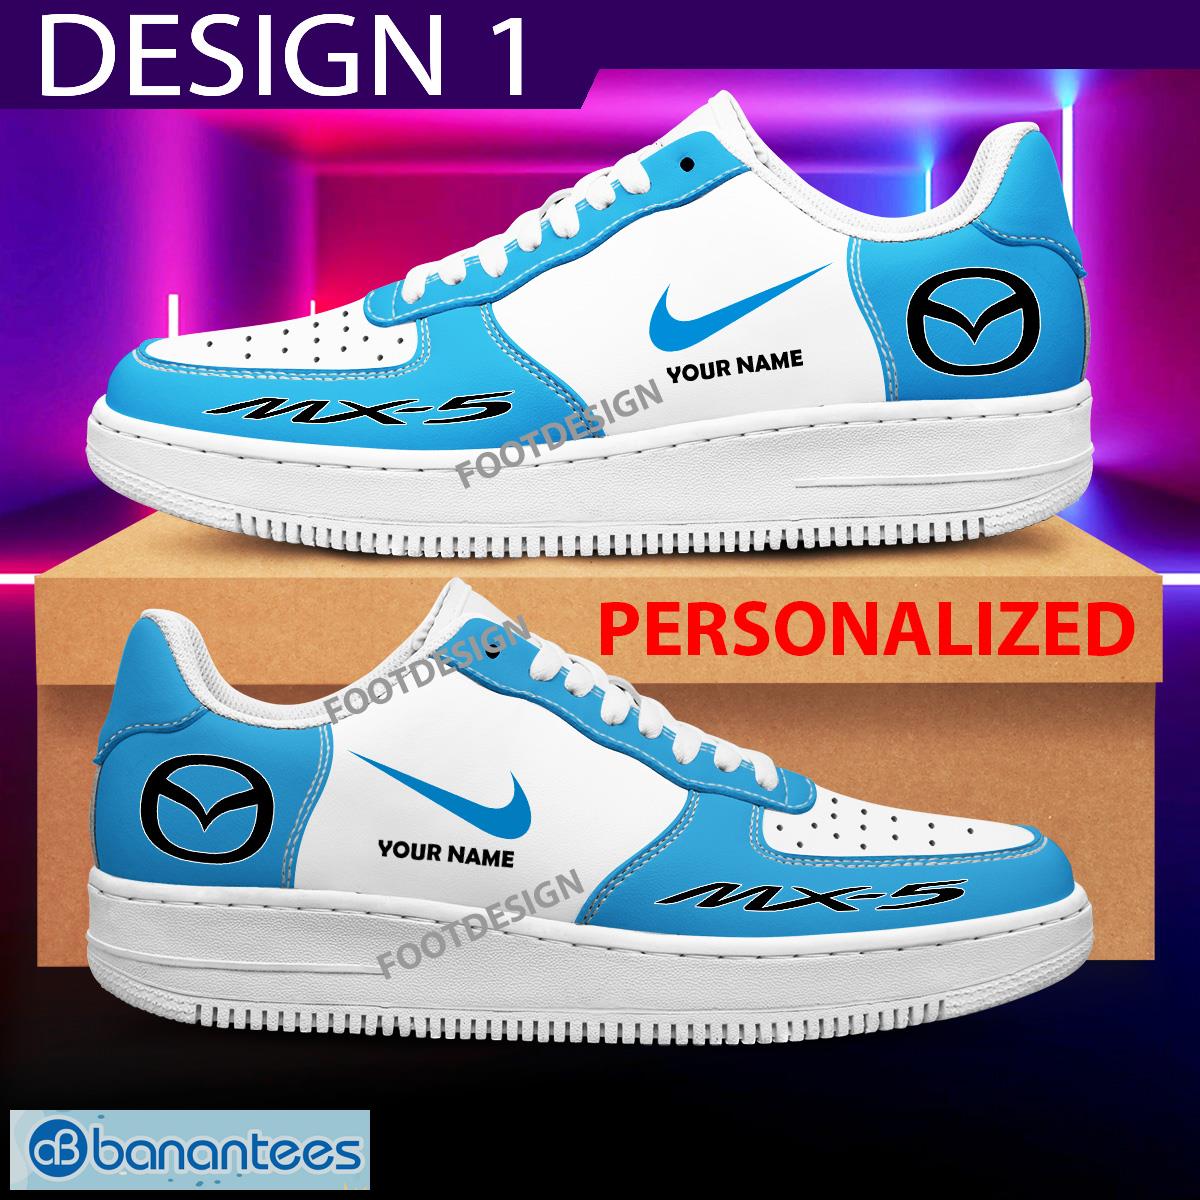 Mazda Mx 5 Car Racing Air Force 1 Shoes Personalized Gift AF1 Sneaker For Men Women - Mazda Mx 5 Car Racing Air Force 1 Shoes Personalized Photo 1